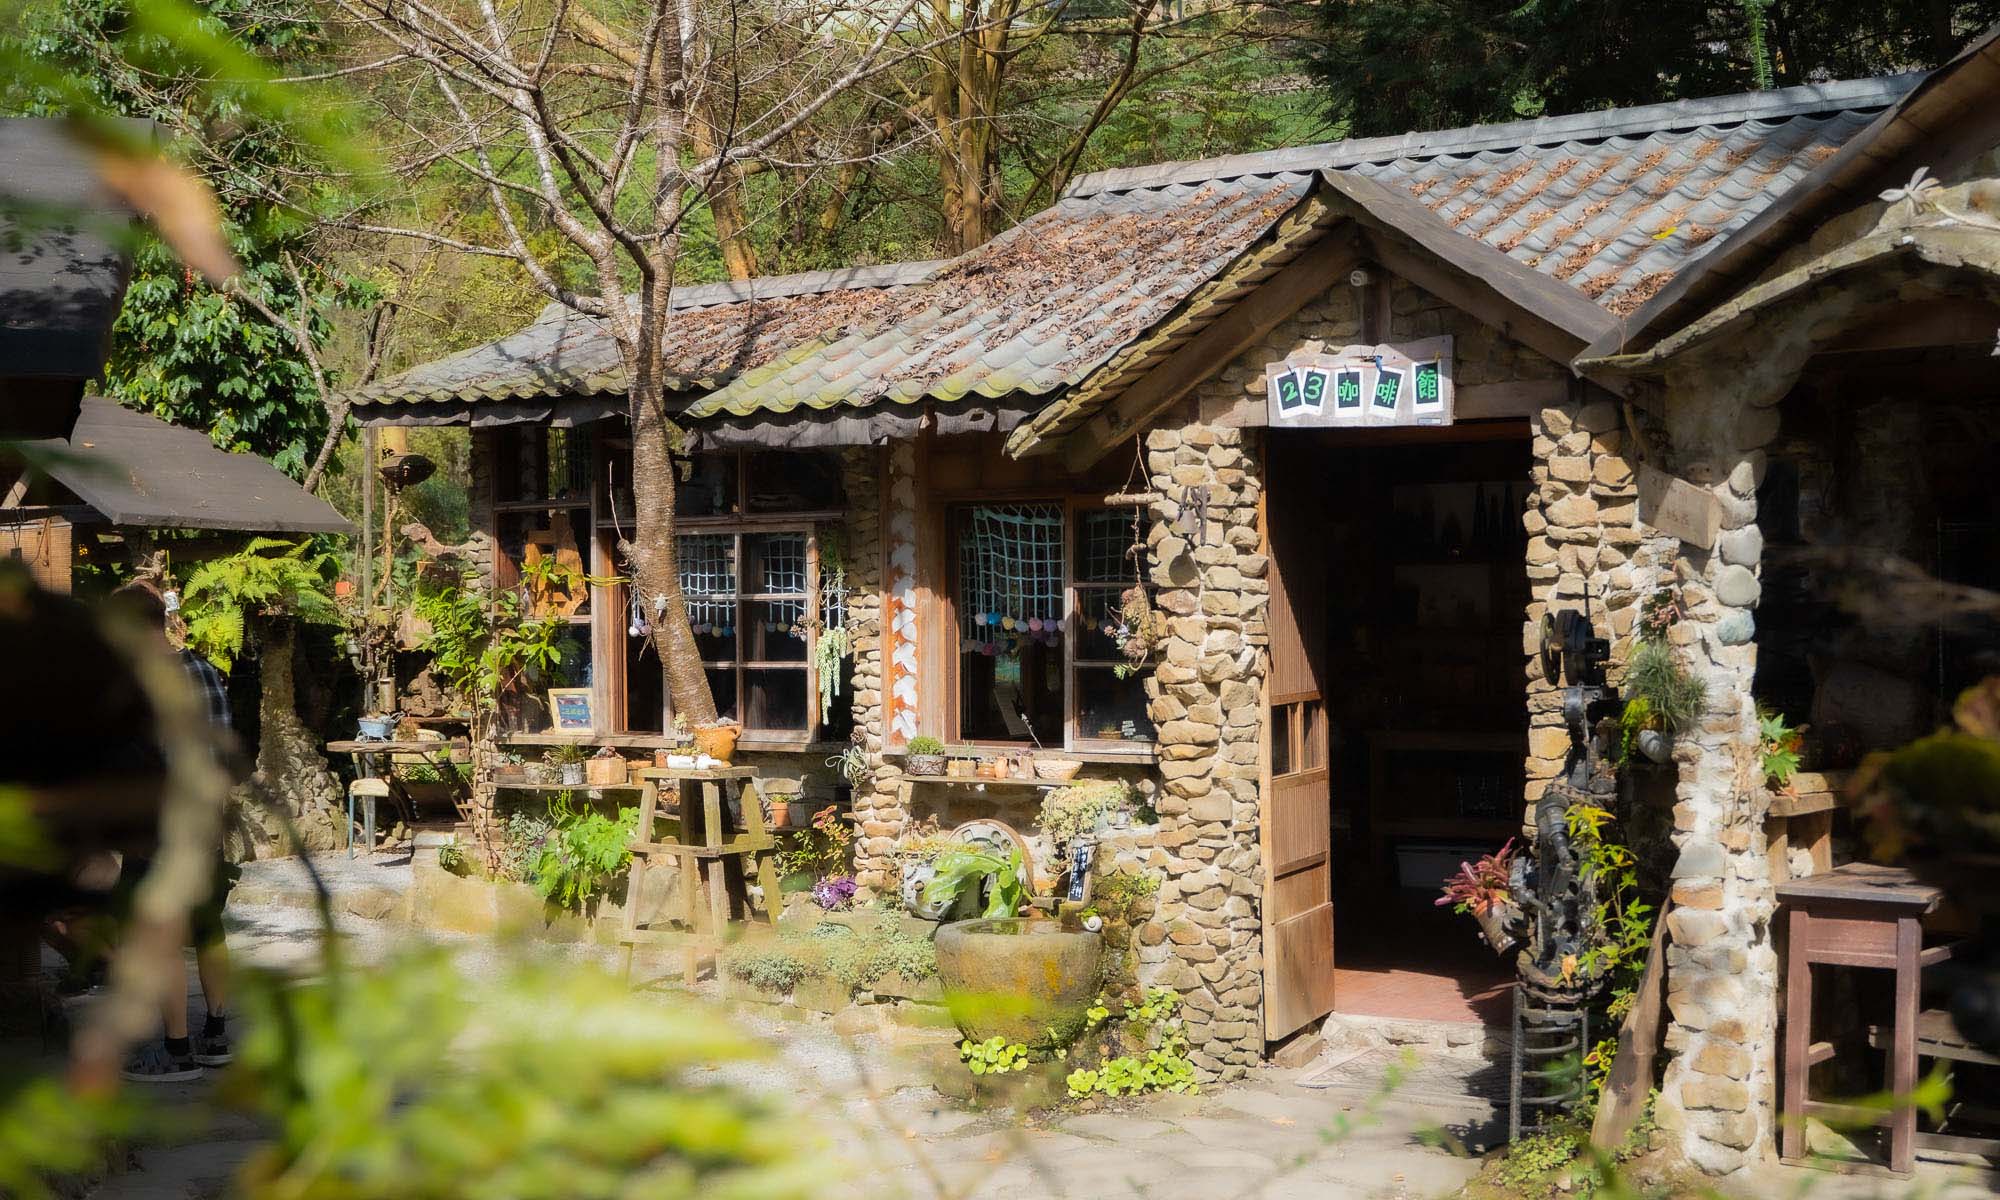 Ajang Home 23 is a rustic coffee house built of of stones.